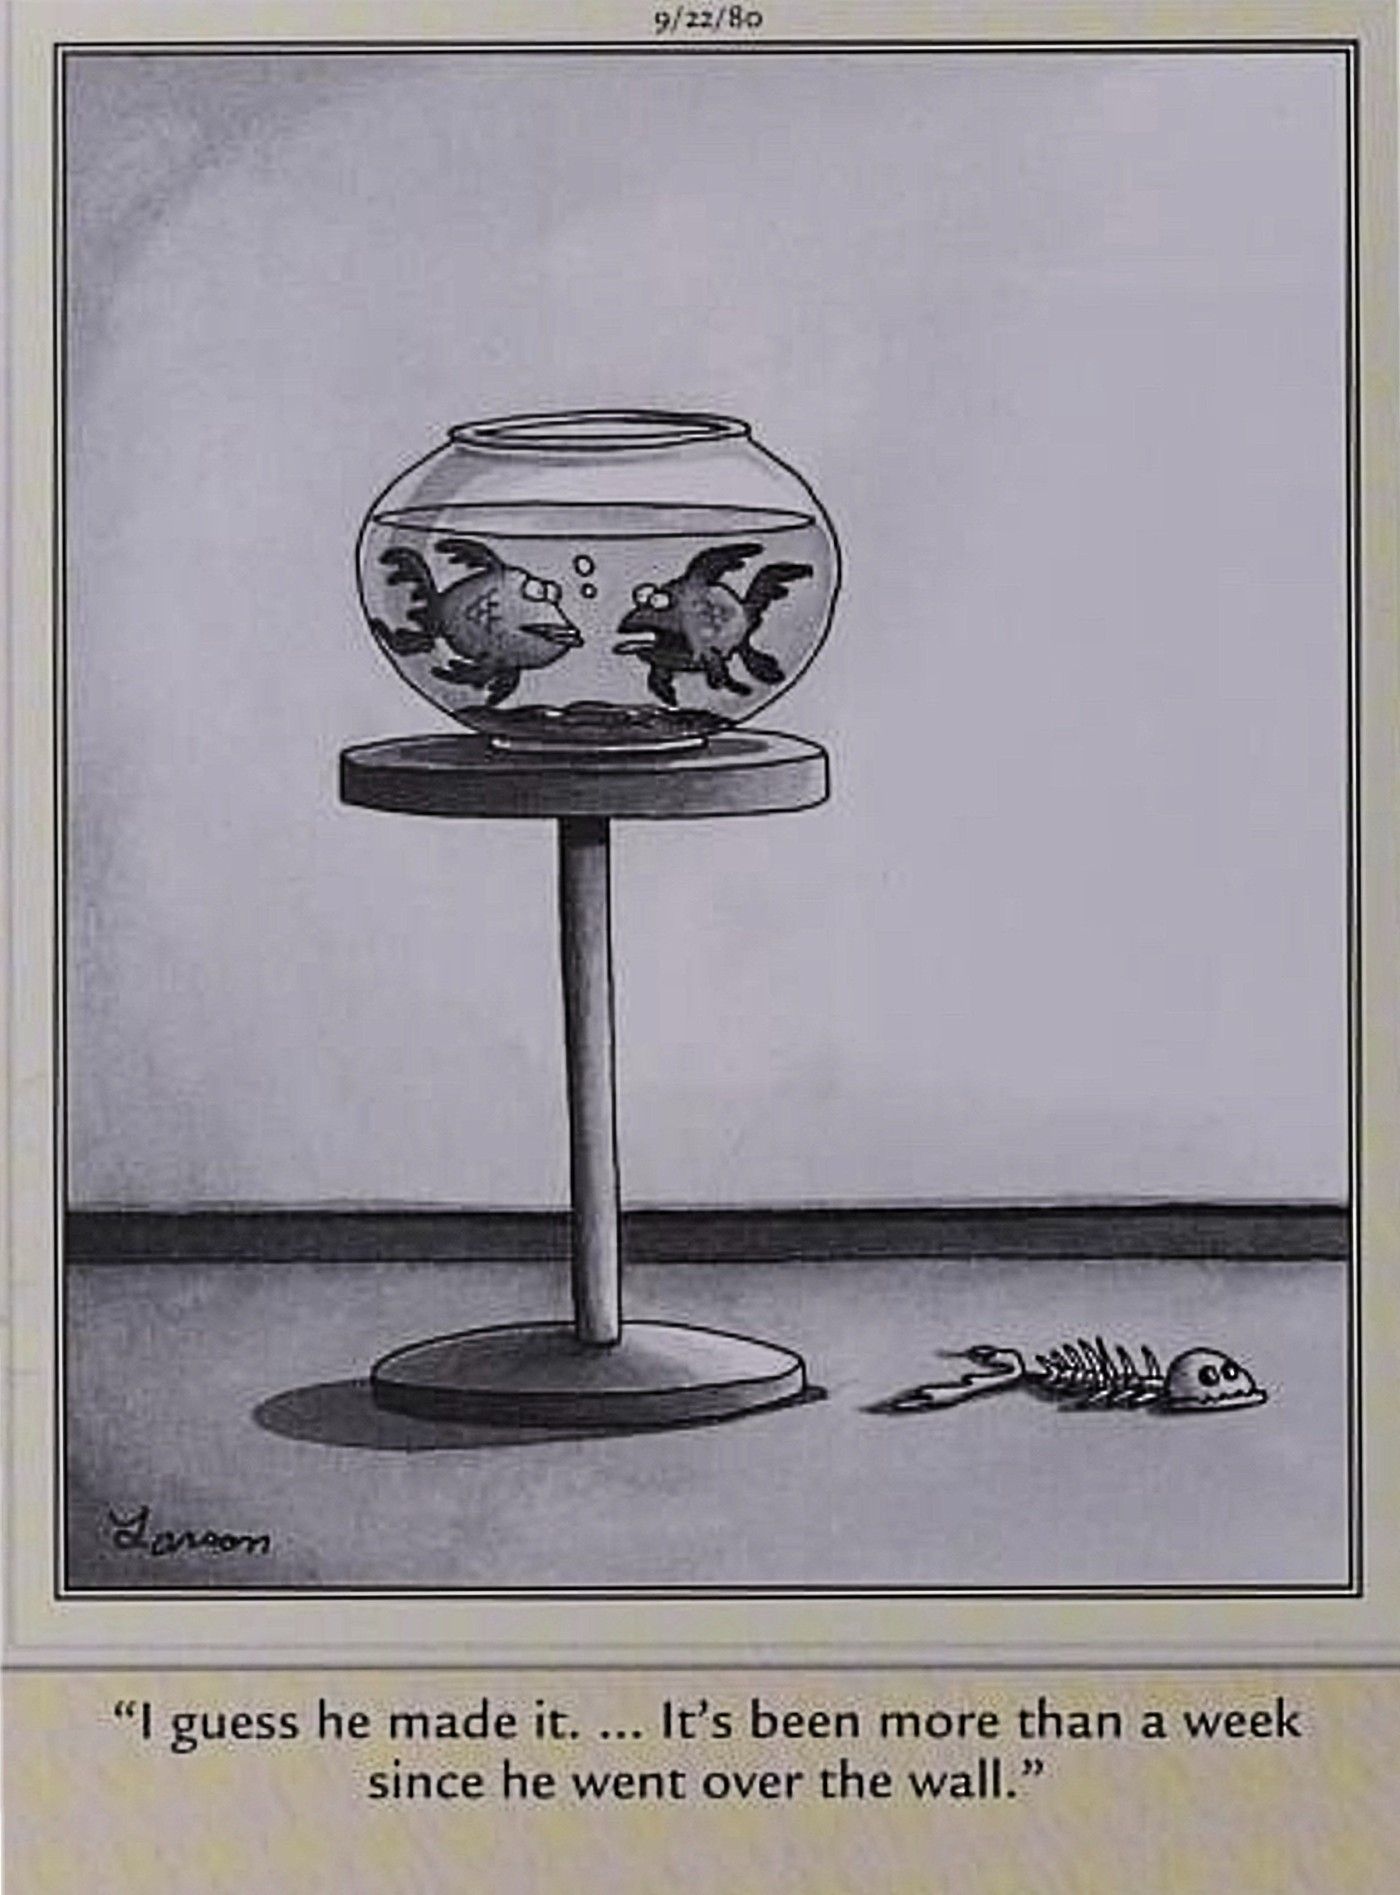 Far Side, fish died trying to escape captivity